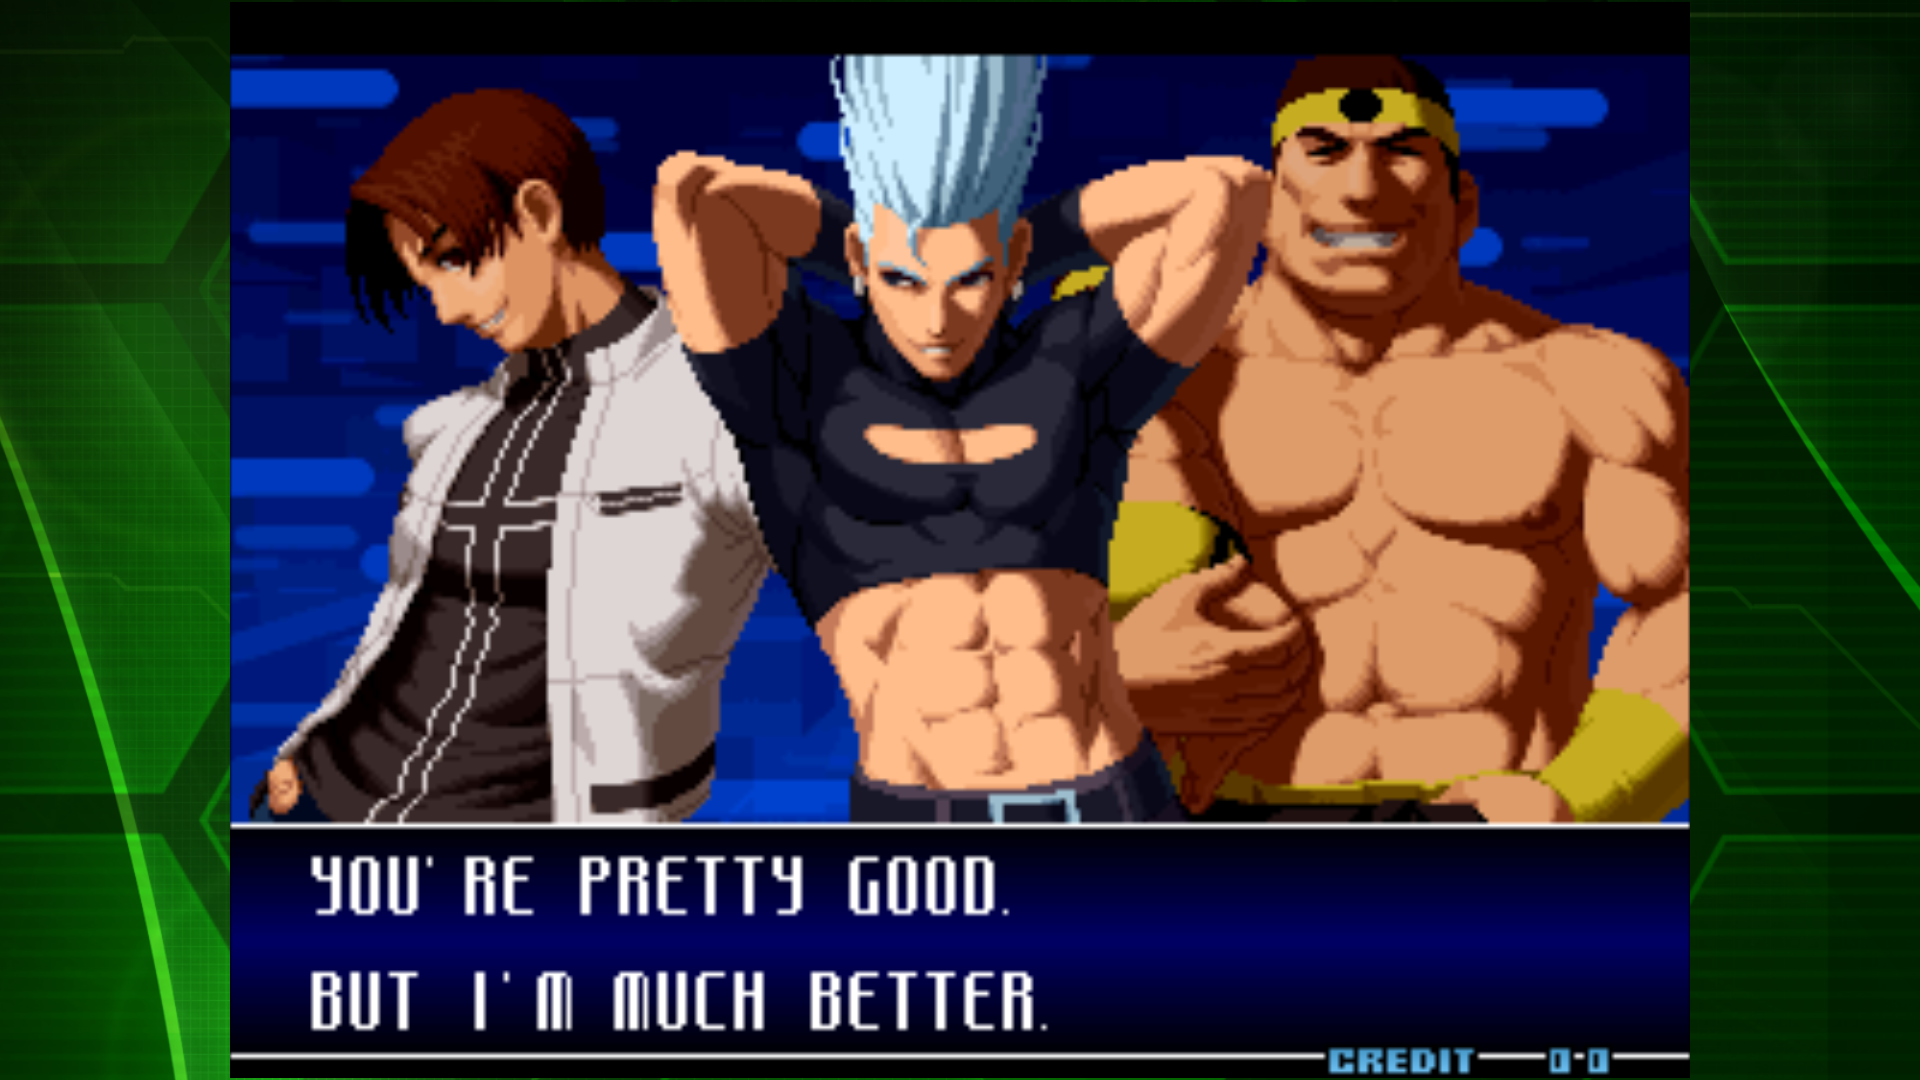 Guide king of fighters 97 APK + Mod for Android.